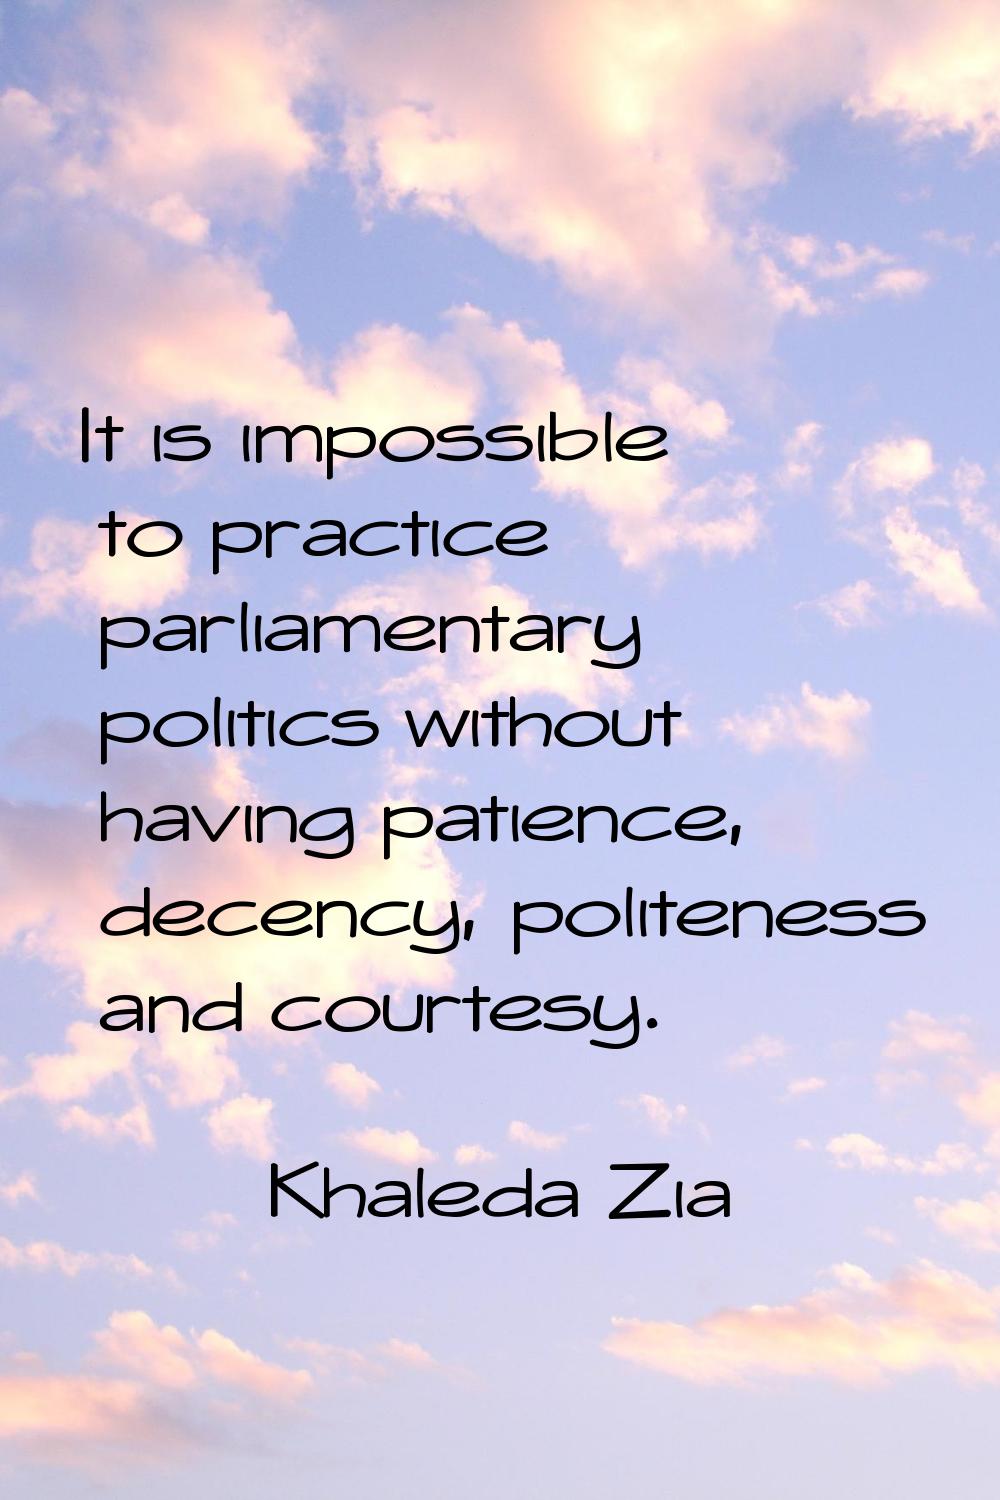 It is impossible to practice parliamentary politics without having patience, decency, politeness an